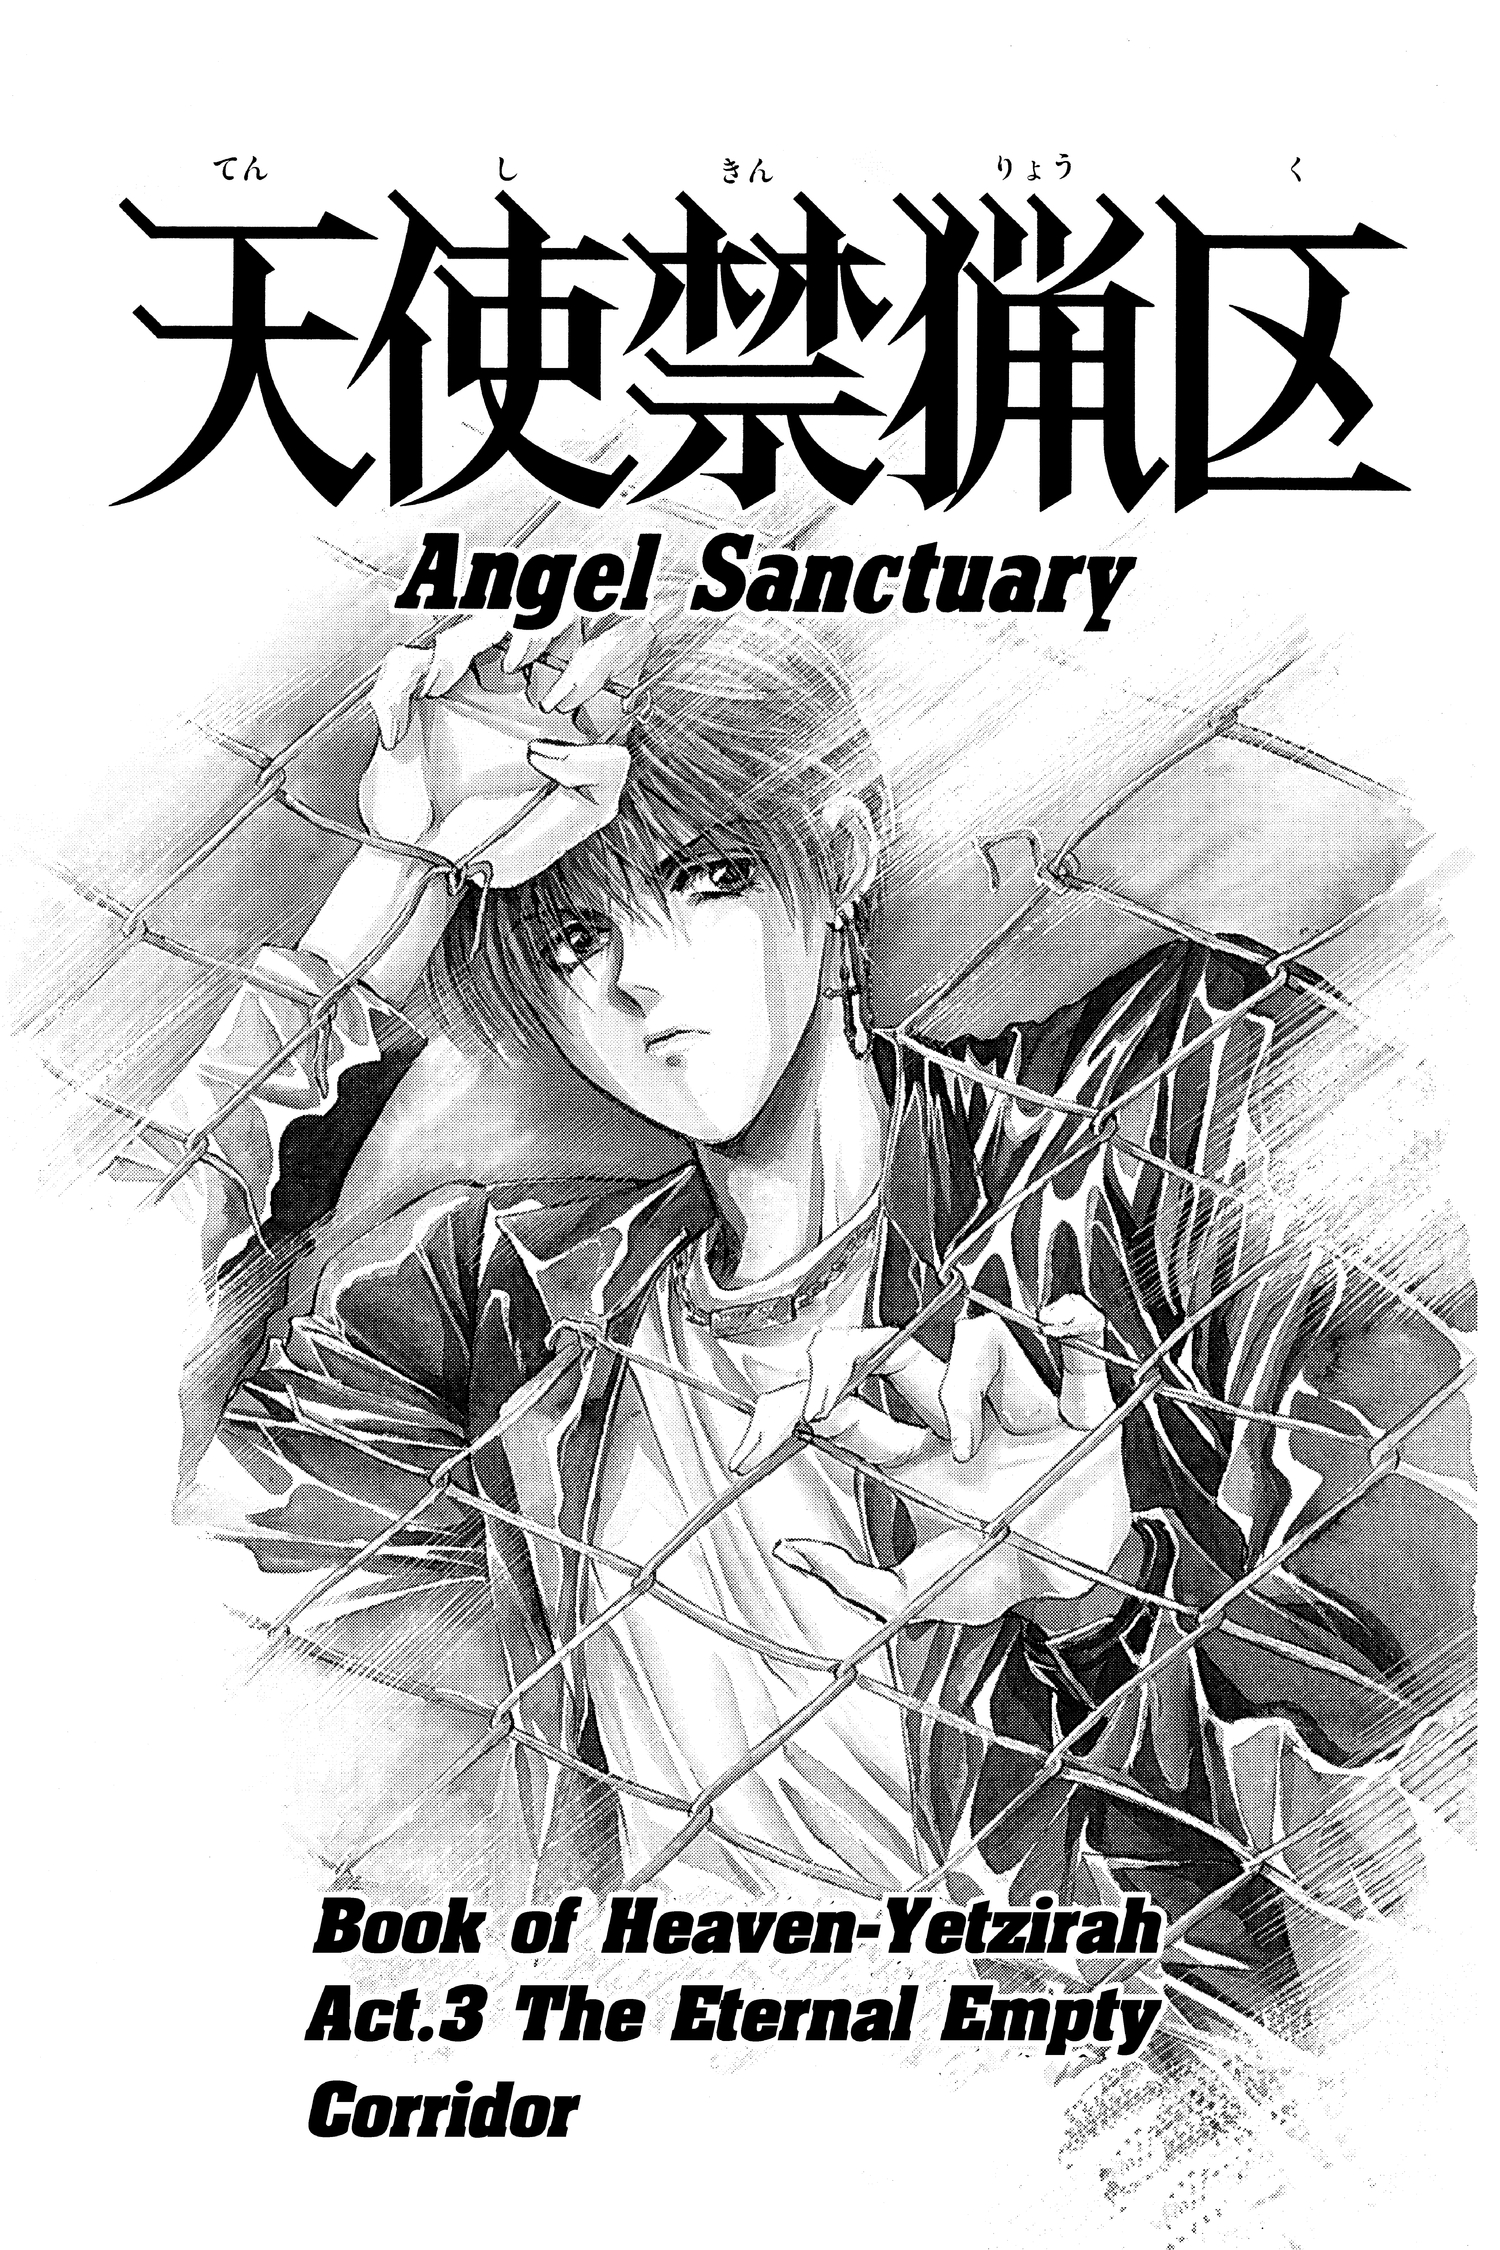 Angel Sanctuary Anime Fiction Character, Sailors, fictional Character, angel,  figurine png | PNGWing